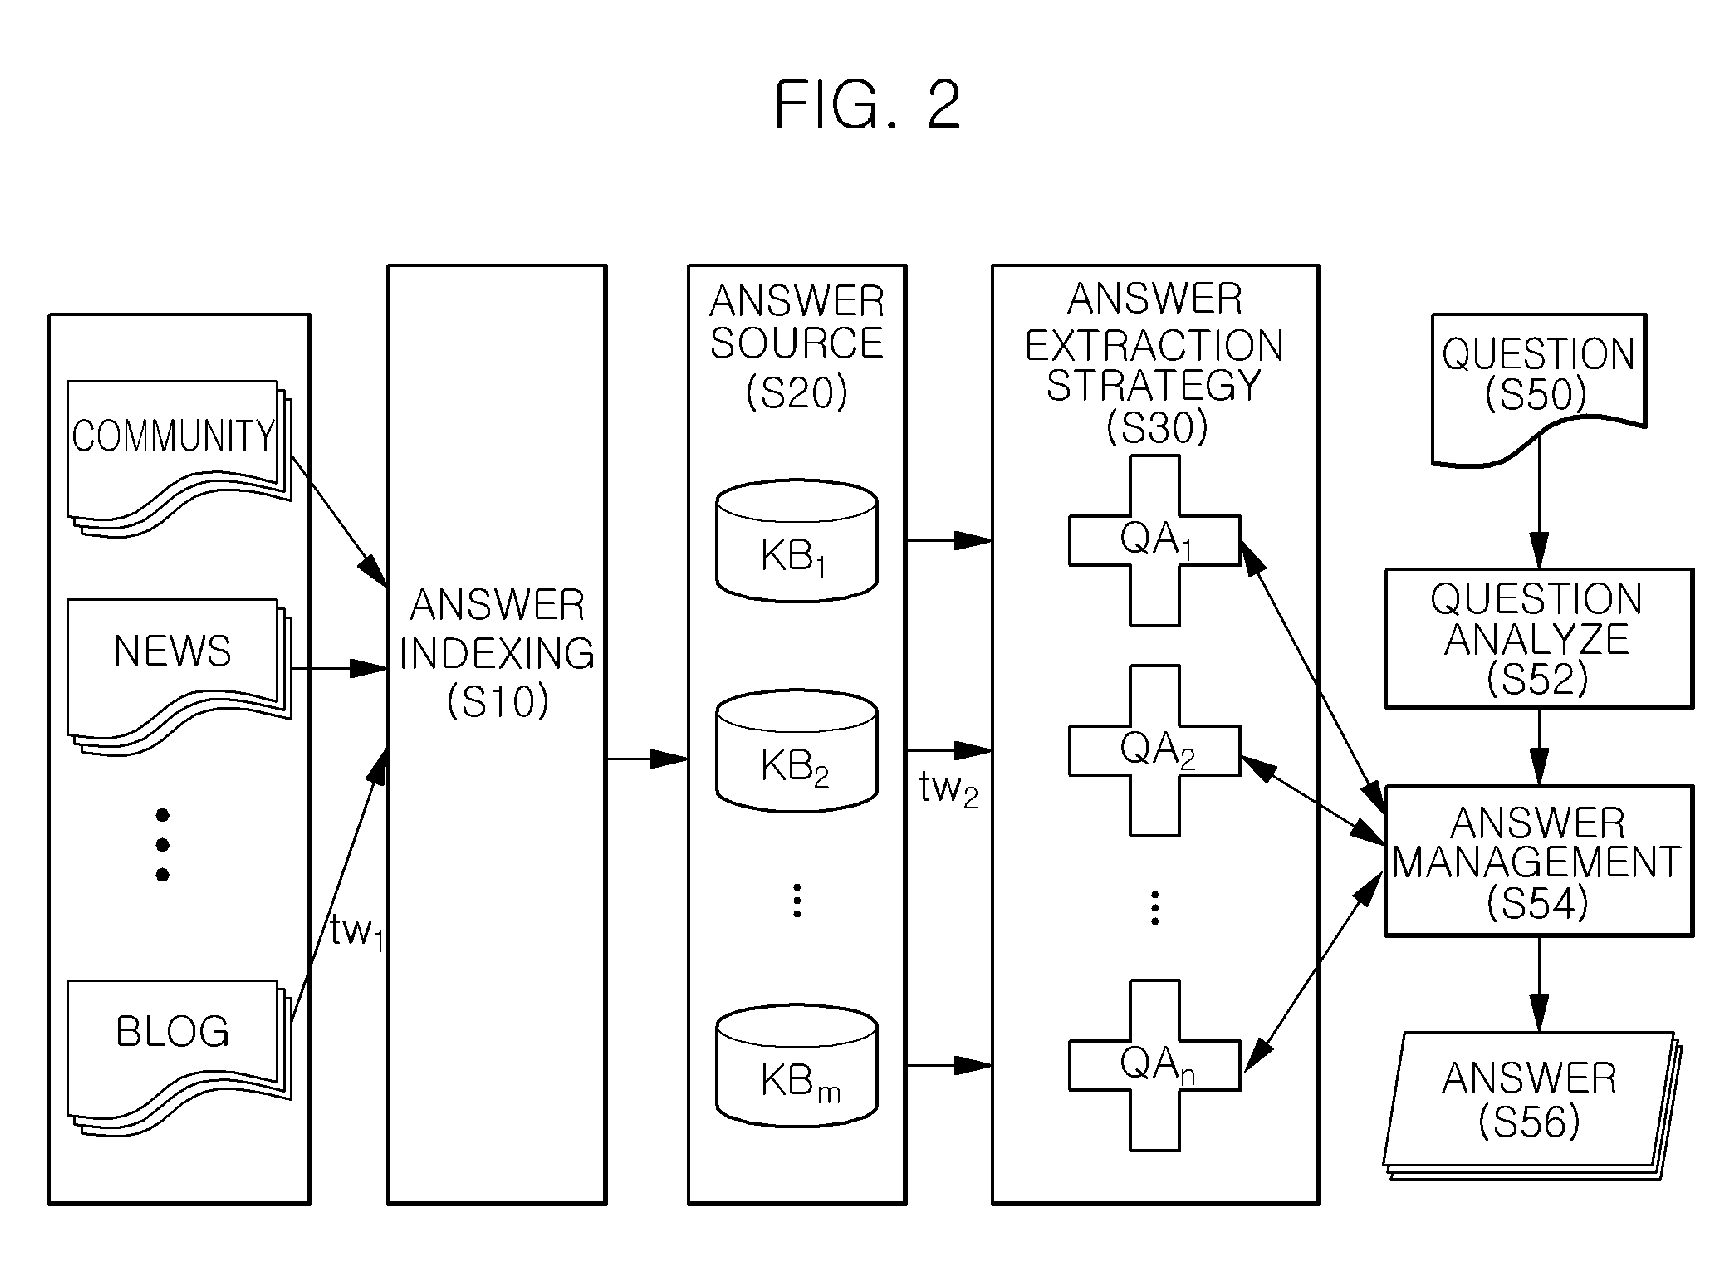 Apparatus for question answering based on answer trustworthiness and method thereof